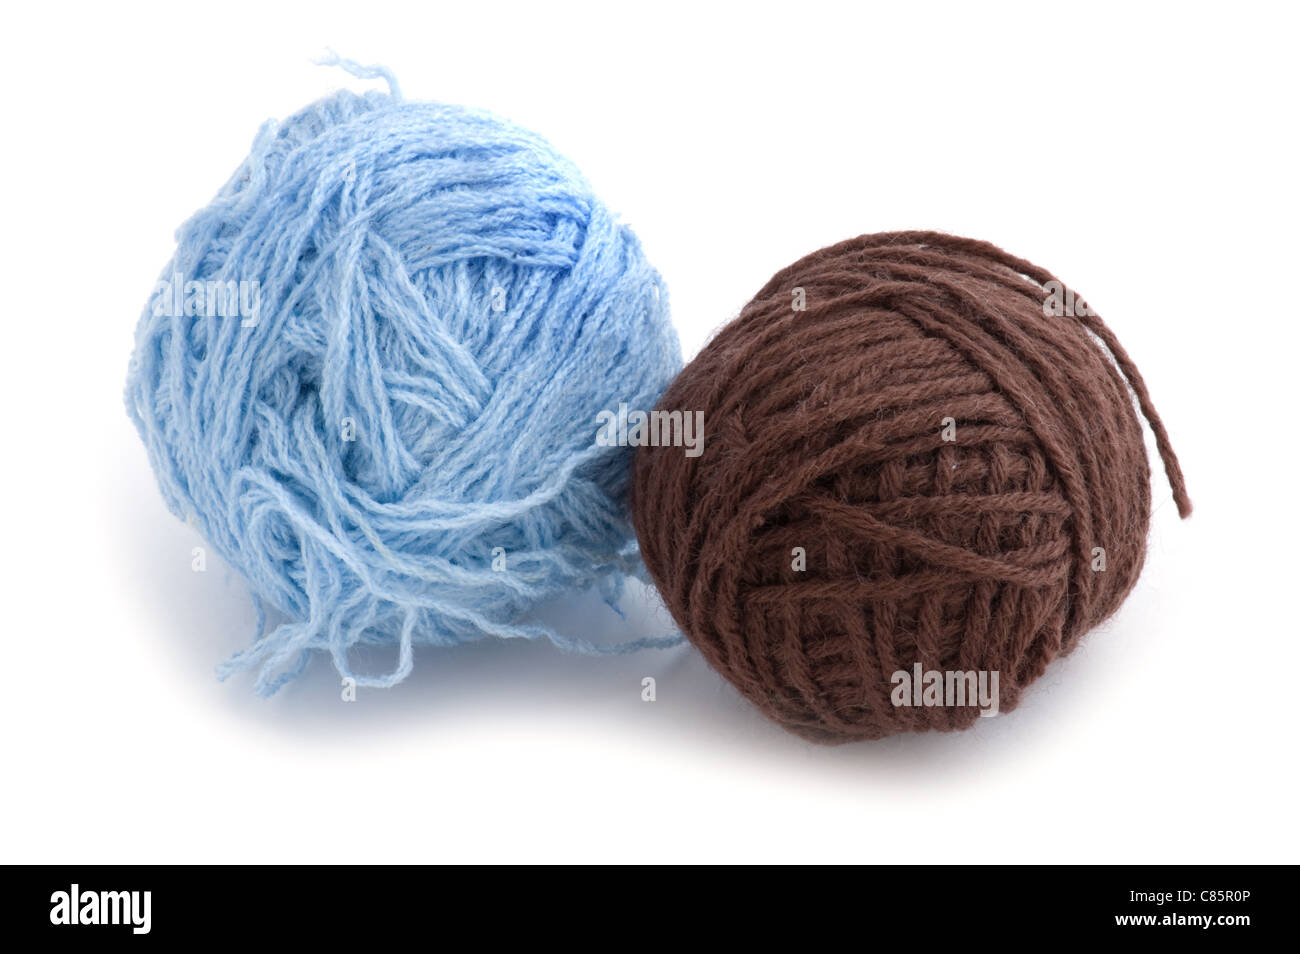 object on white - ball of wool close up Stock Photo